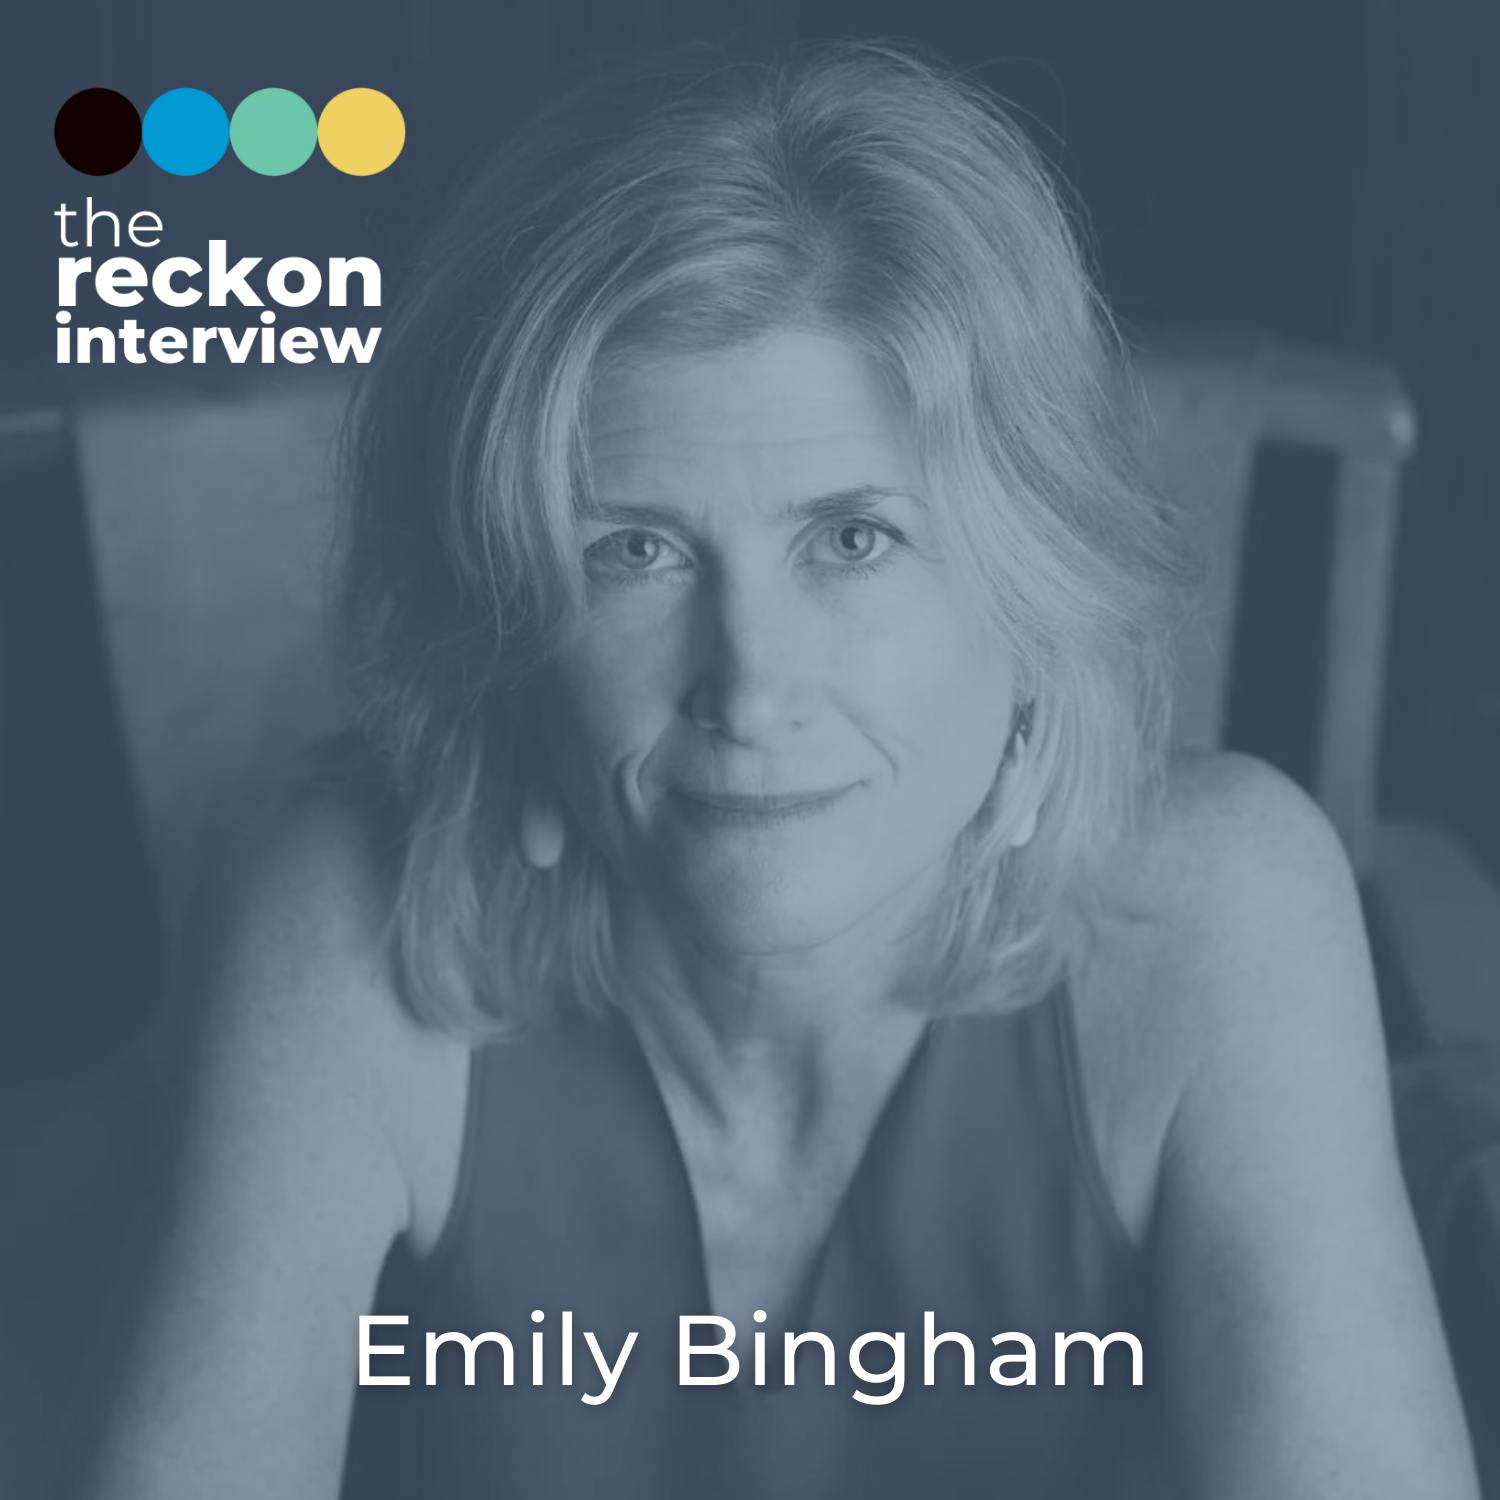 Emily Bingham on the reckoning of 'My Old Kentucky Home'